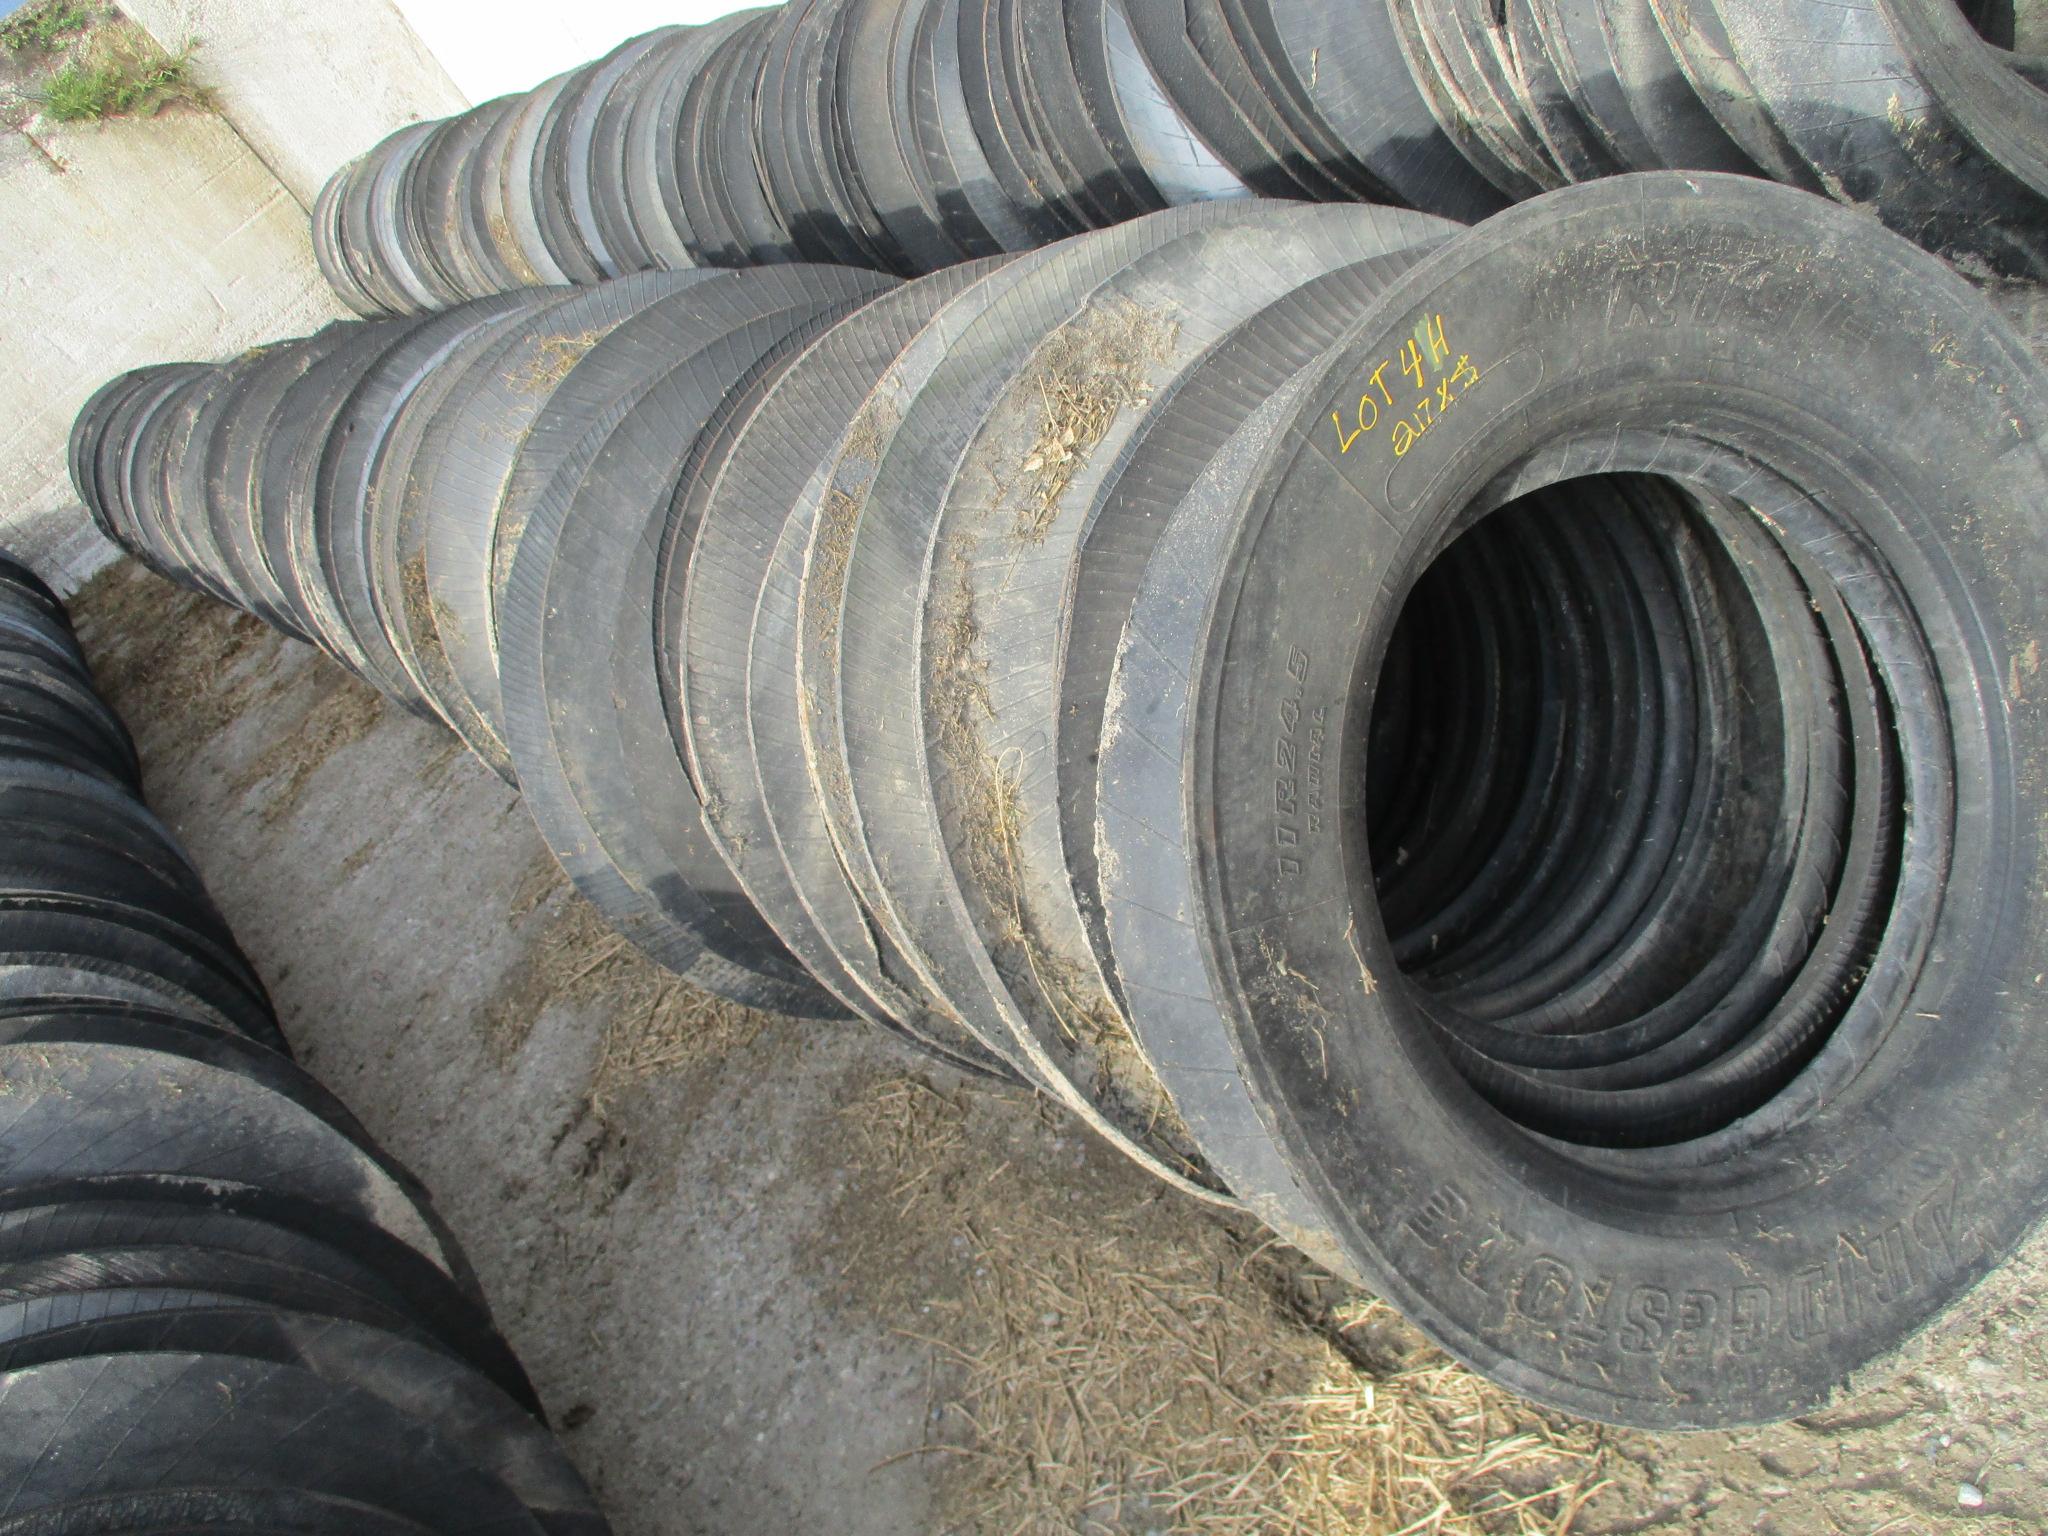 217 Tire sidewalls for bunker cover weights, SELLS 217 X $